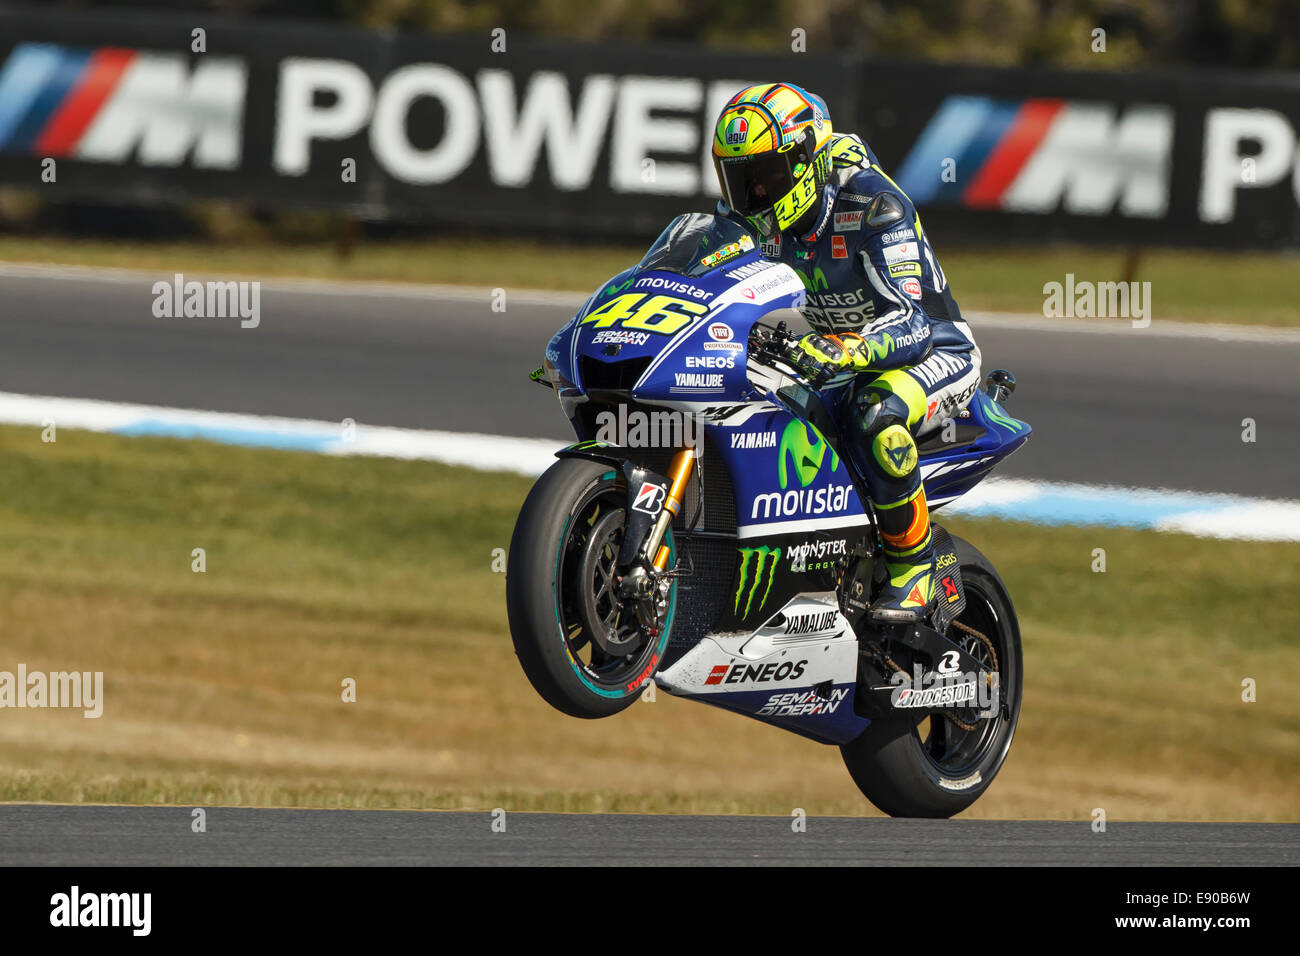 Phillip Island, Australia. 17th October, 2014. Valentino Rossi puts on a  display for the crowd at the end of free practice at the Australian  Motorcycle Grand Prix. Rossi managed to finish the